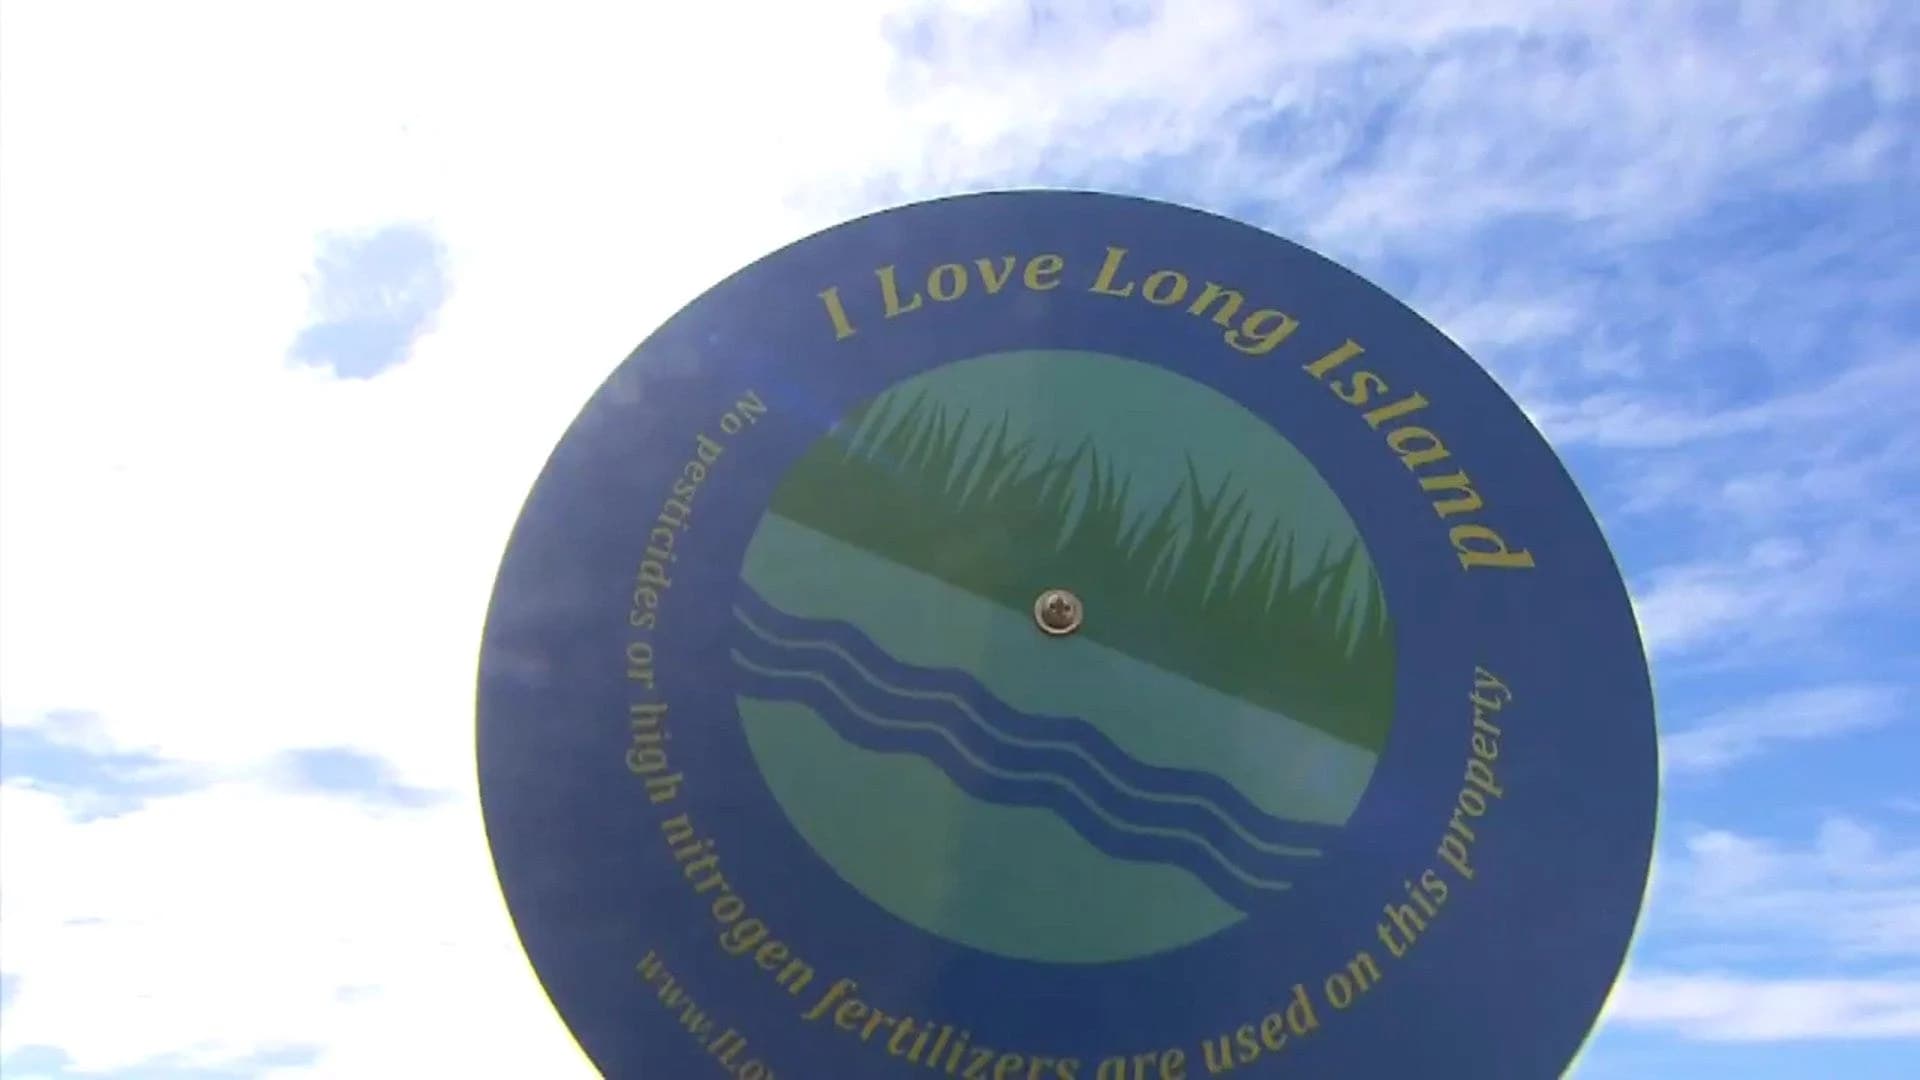 Go Green: I Love Long Island campaign helps improve groundwater